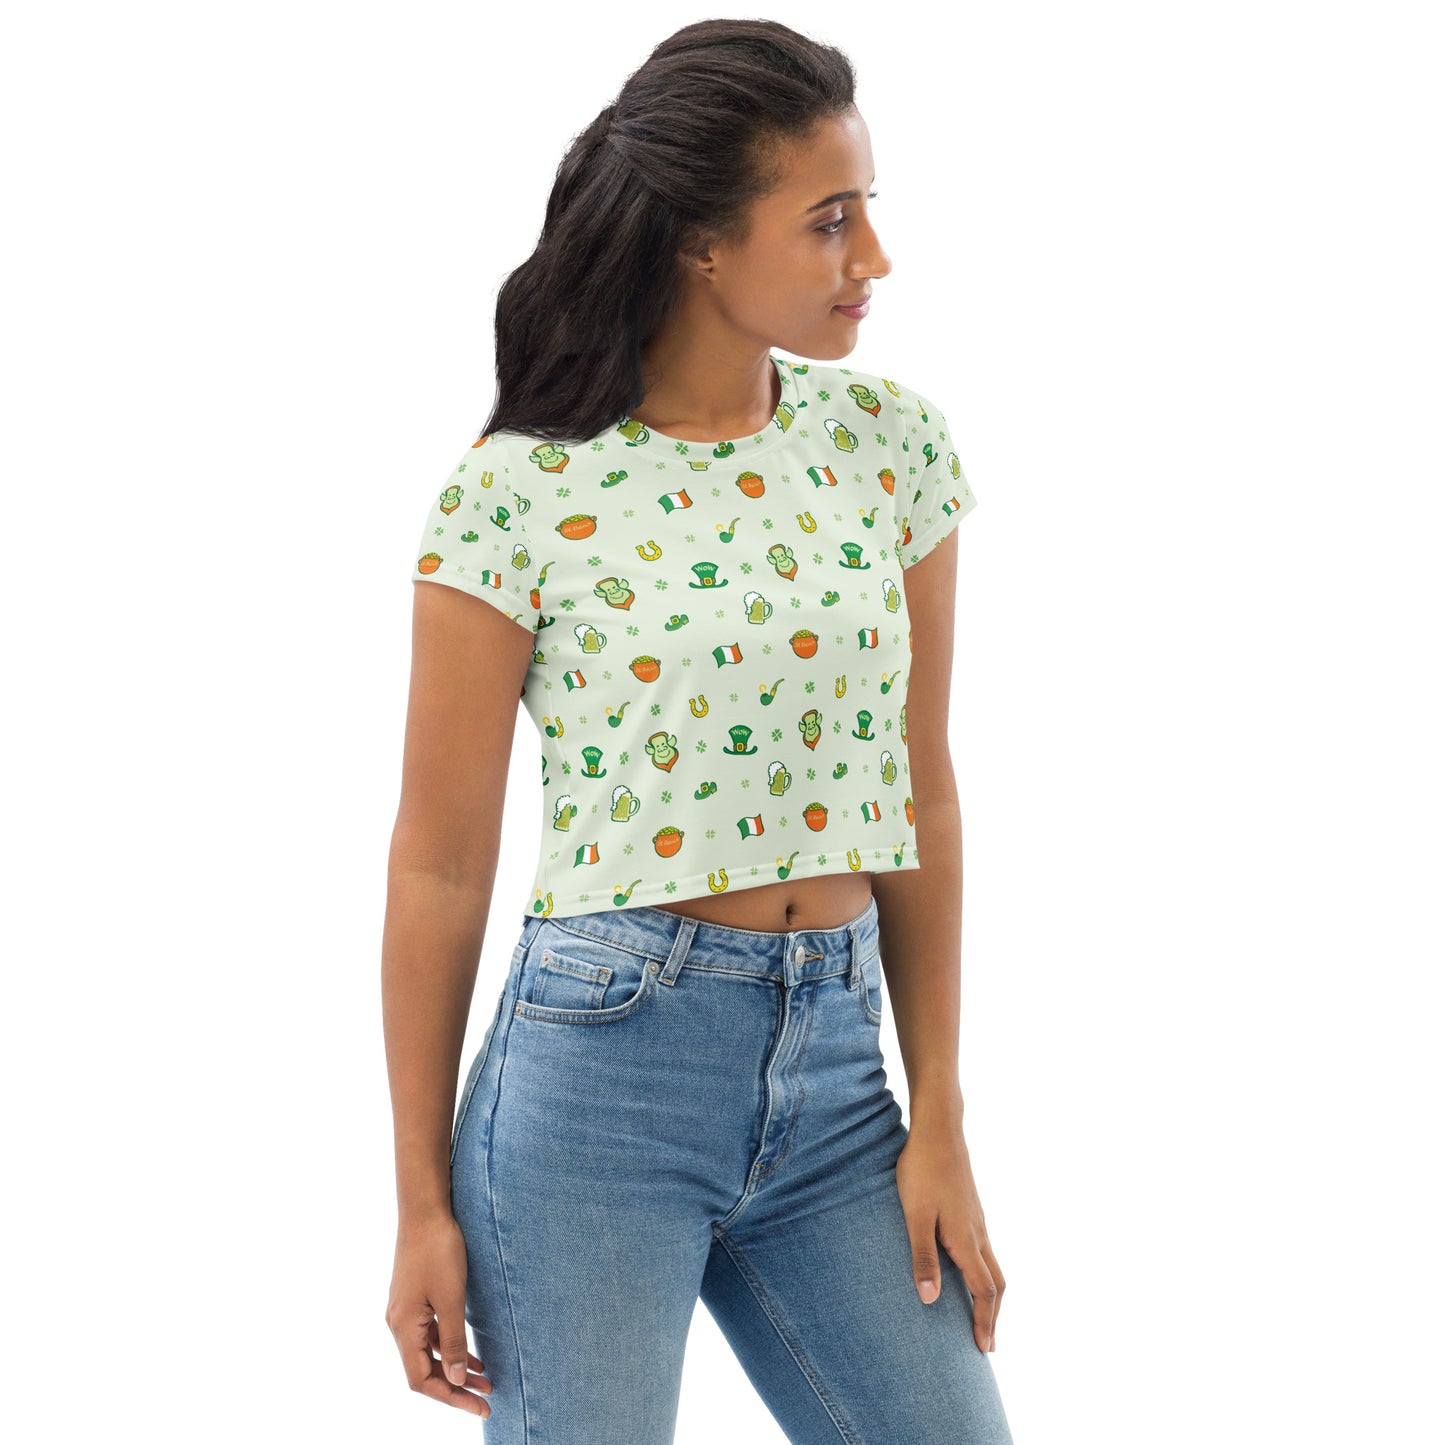 Celebrate Saint Patrick's Day in style All-Over Print Crop Tee. Right front view